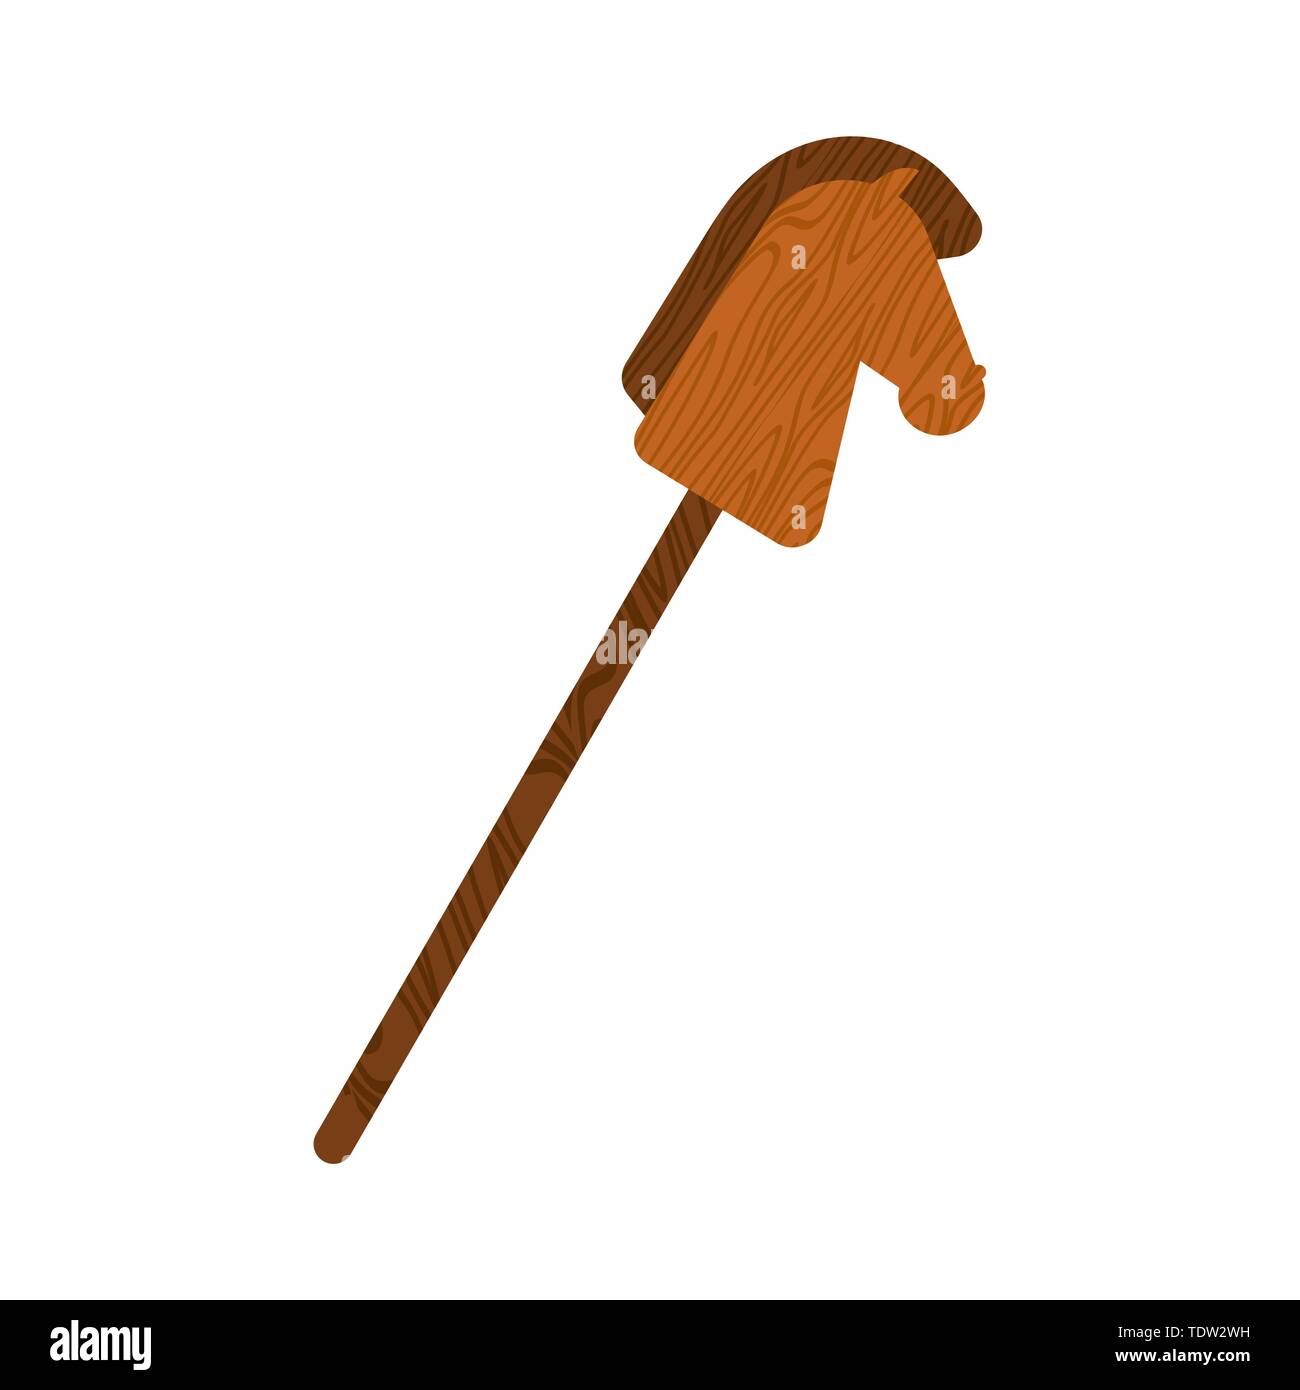 wooden horse toy stick